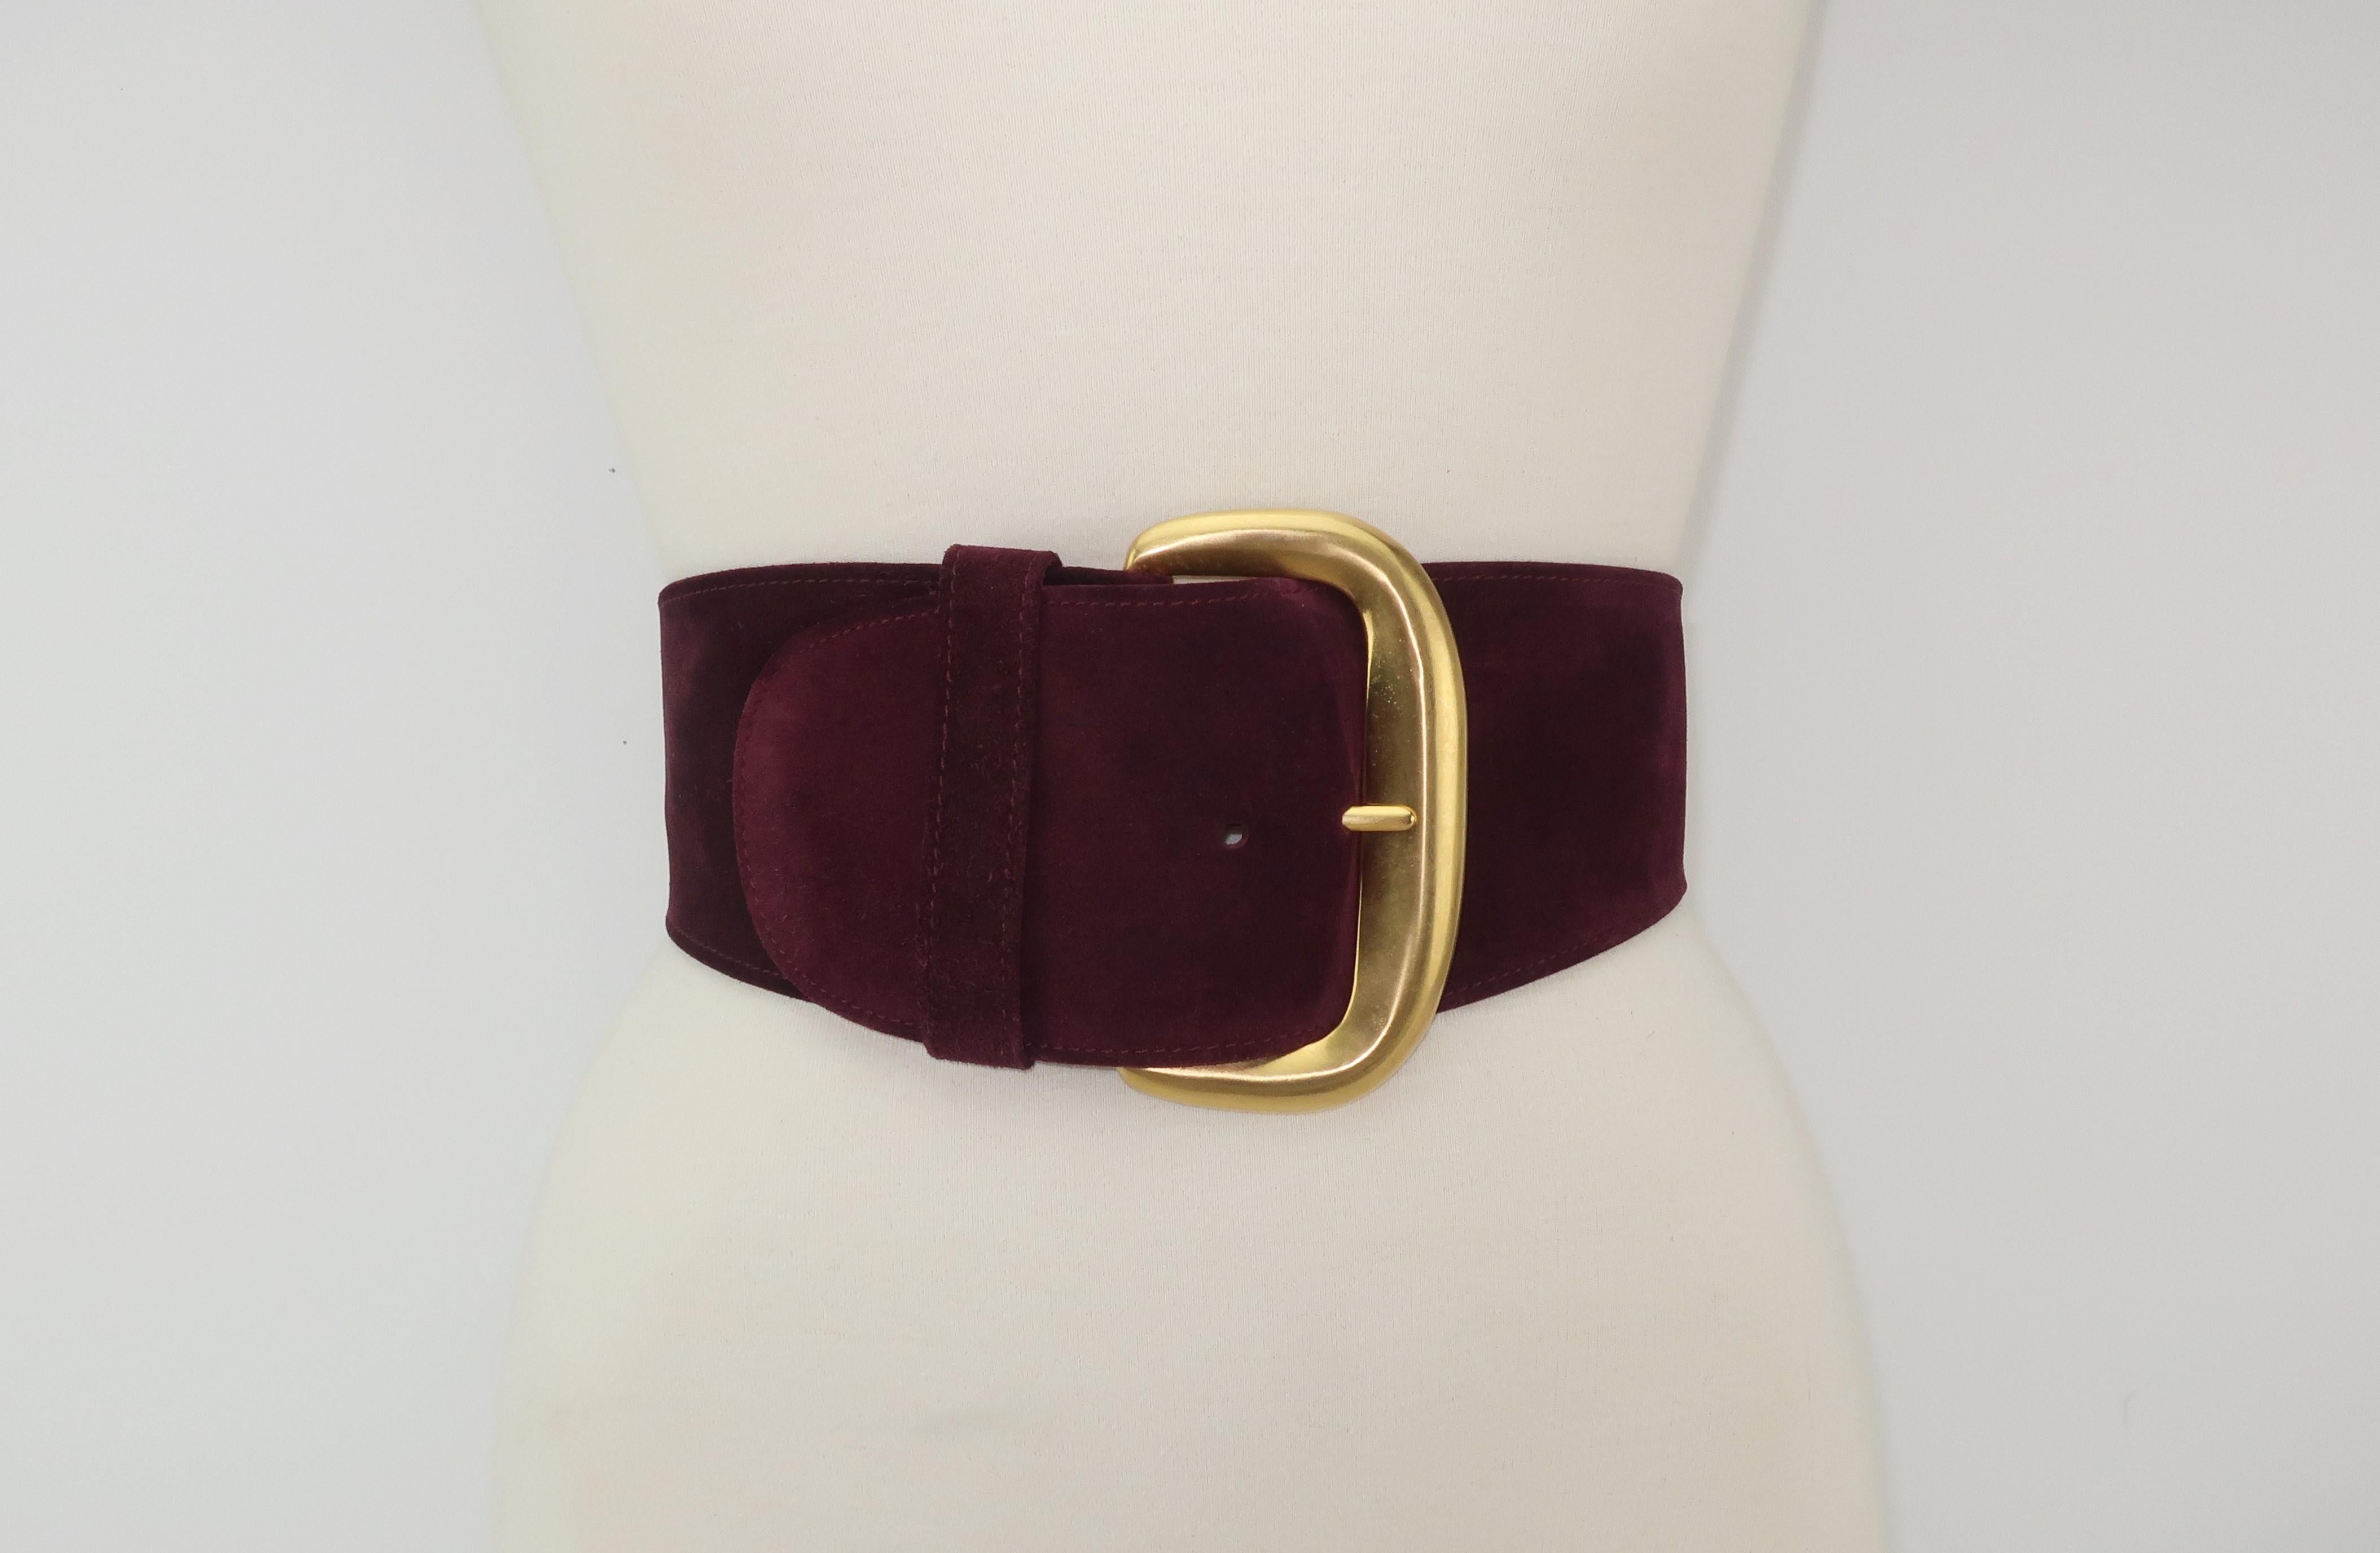 Be a fashionable superhero with this large-and-in-charge belt designed by Robert Lee Morris for Donna Karan.  The collaboration between Karan & Morris was a perfect combination of her fluid silhouettes accessorized with his organically sculptural